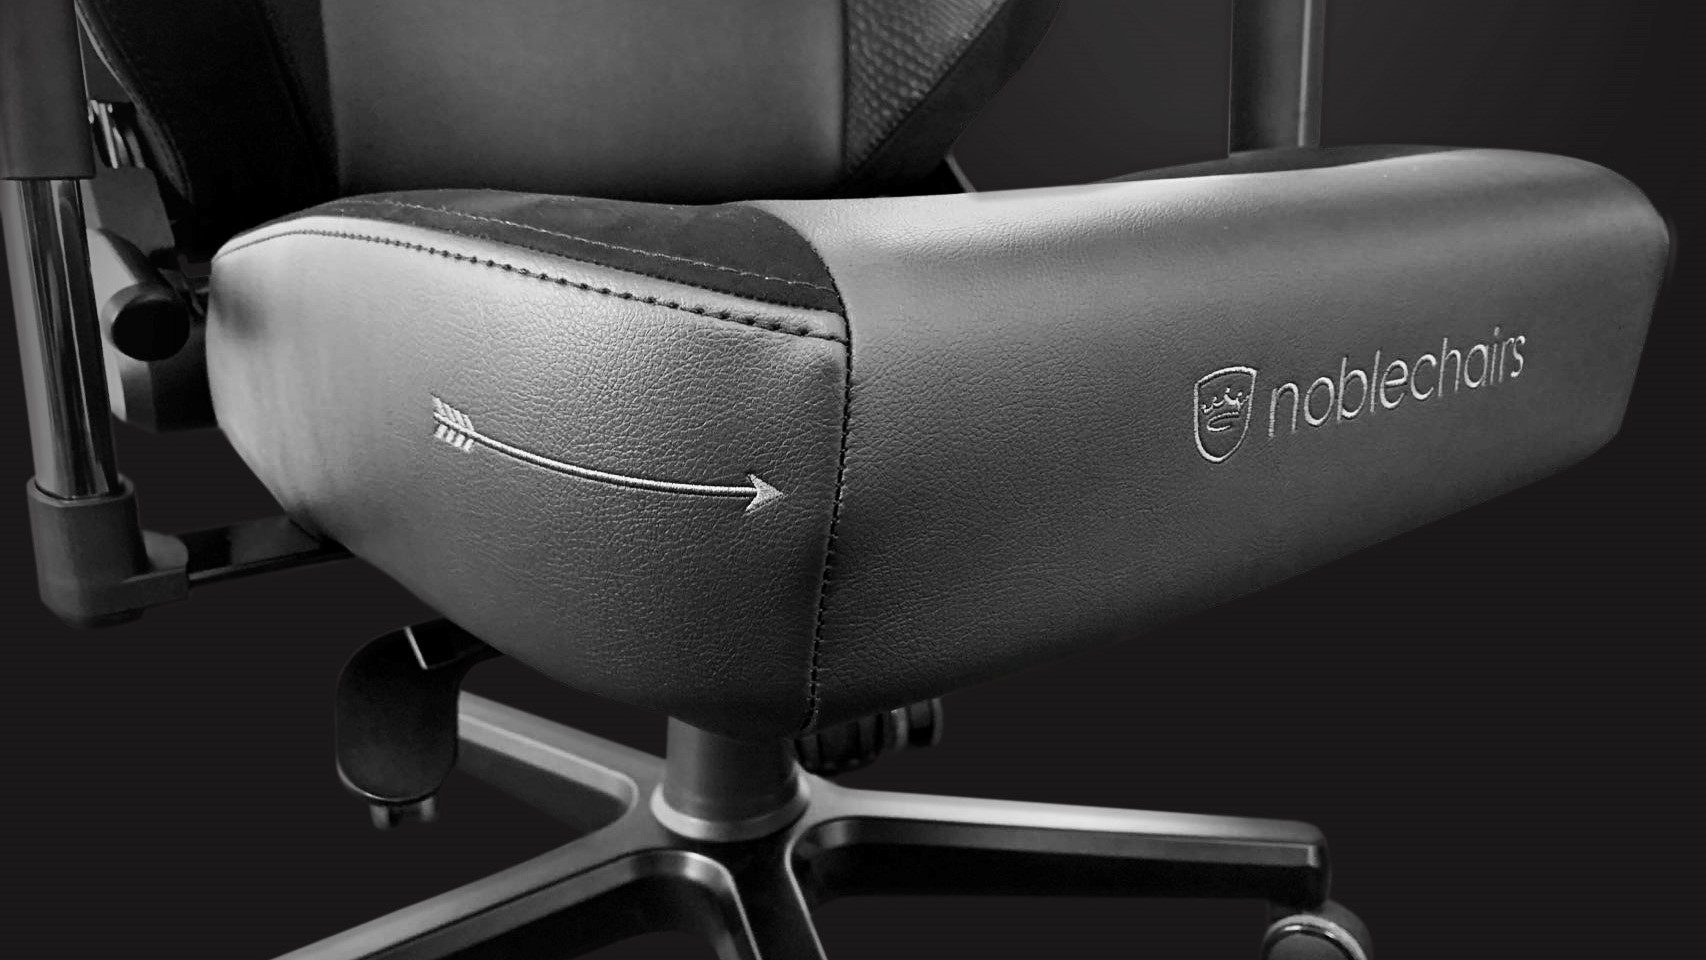 Noblechairs’ Skyrim 10th anniversary gaming chair is a subtle Nordic nod